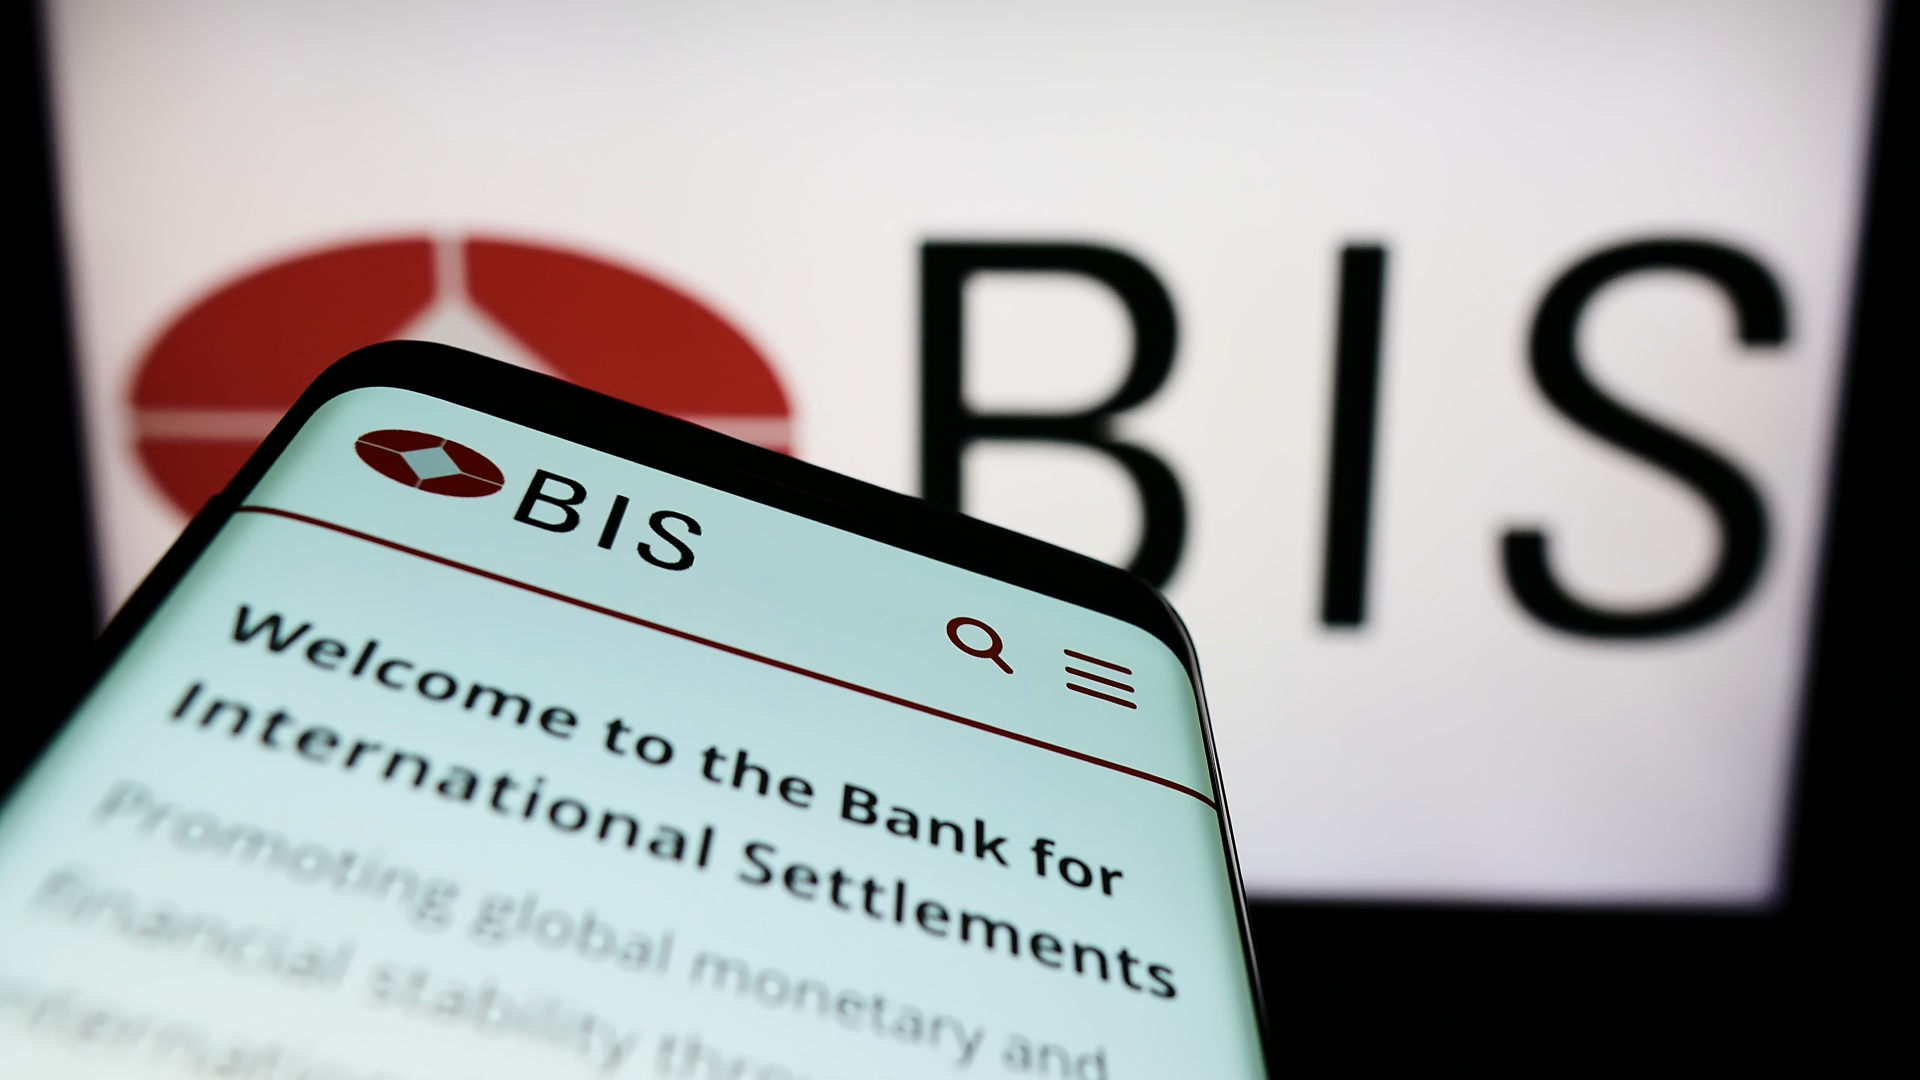 BIS Backs Tokenization, But Disses Crypto as “Flawed System”